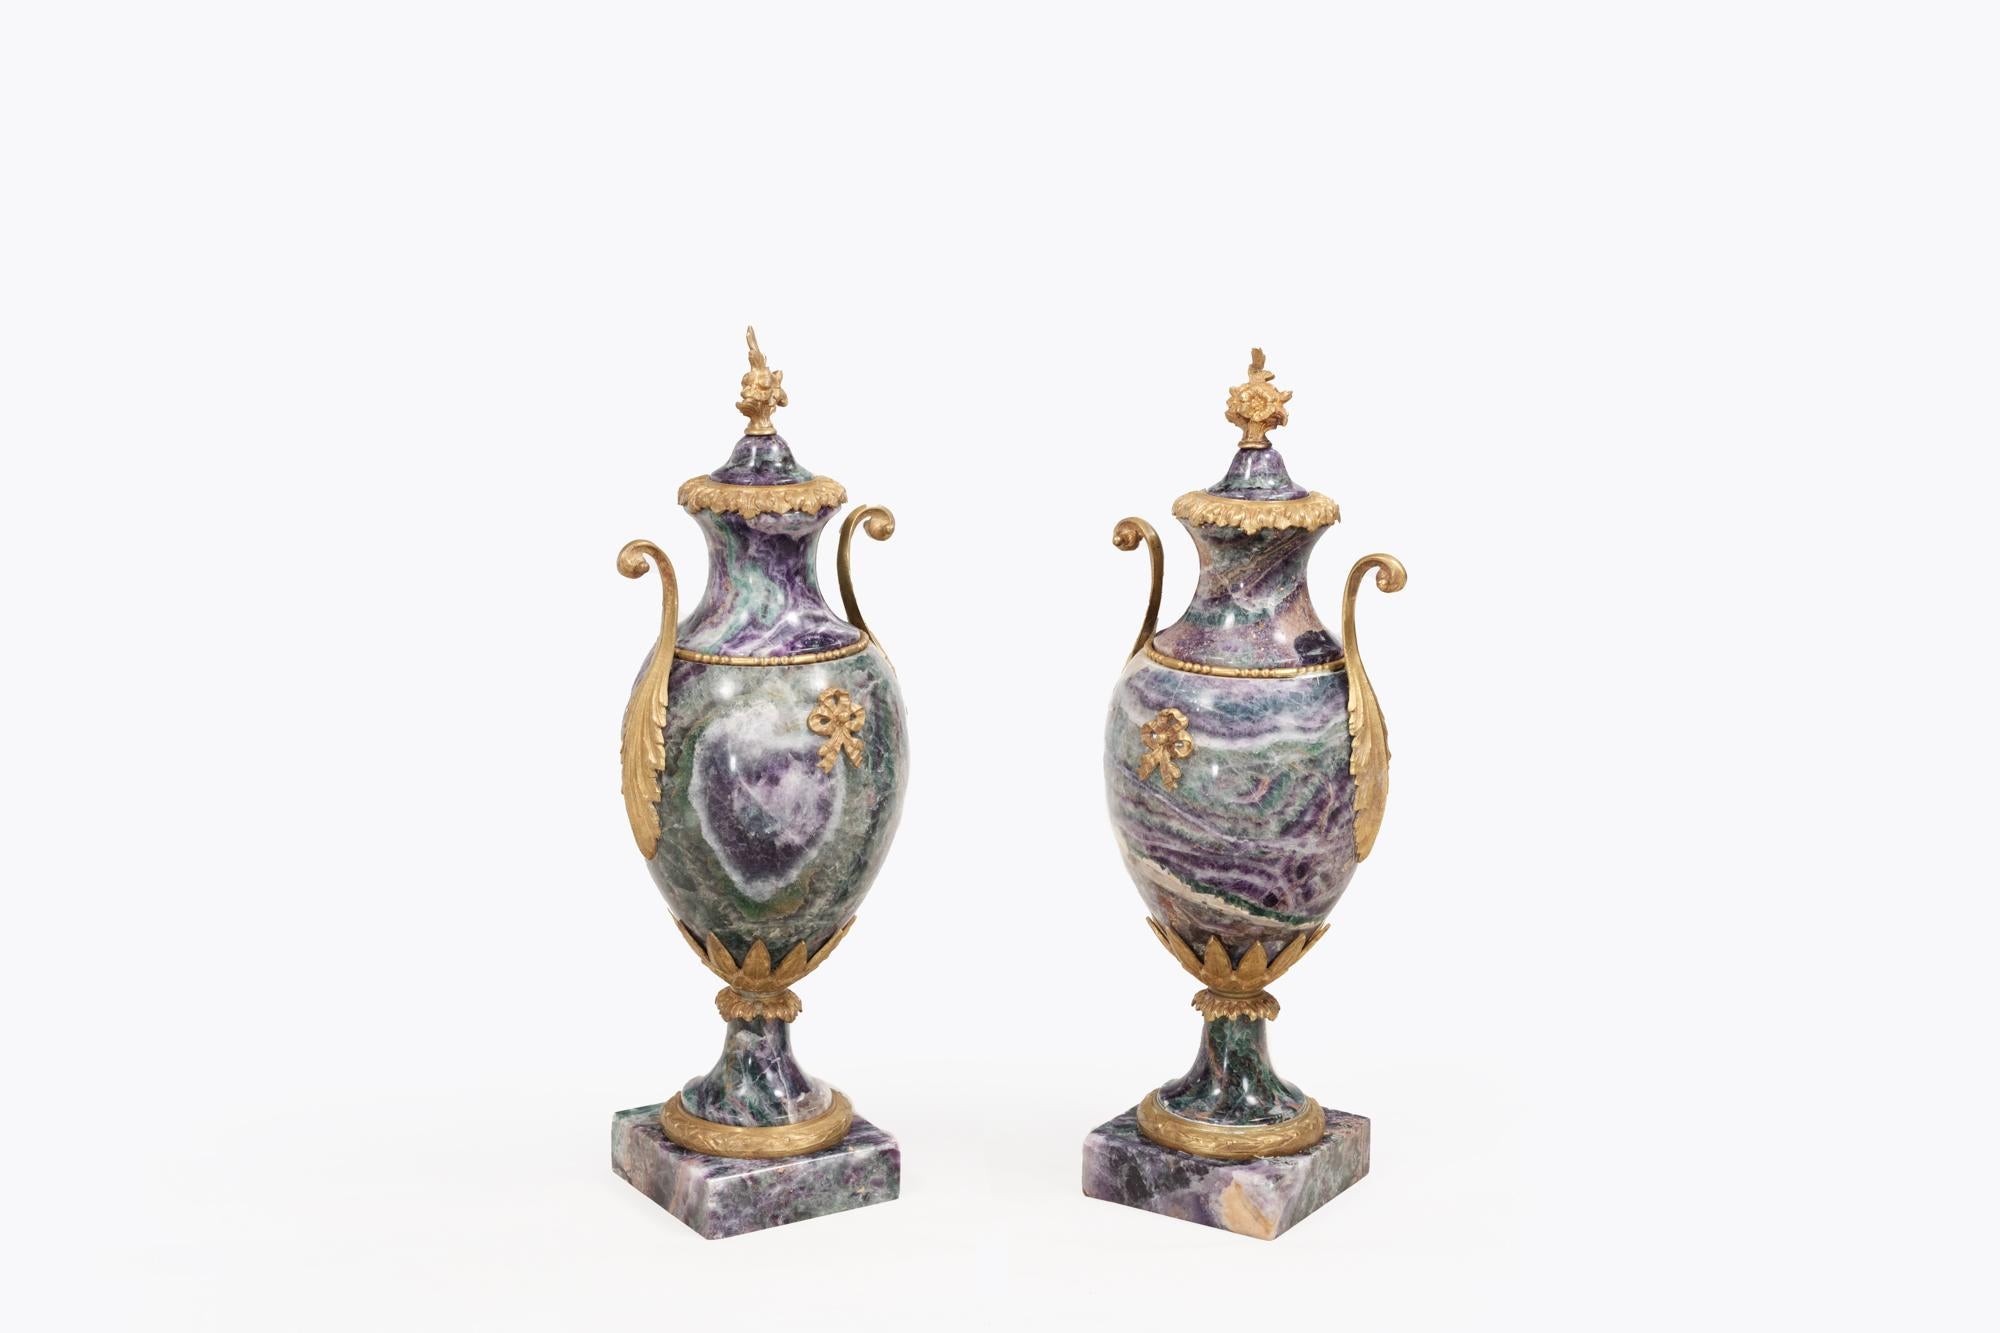 Pair early 19th Century Blue John cassolettes with ormolu mounts each with an ovoid body applied with decorative mounts and scrolling foliate handles, beneath a removable cover topped with foliate finials. The pair sit on a waisted laurel decorated